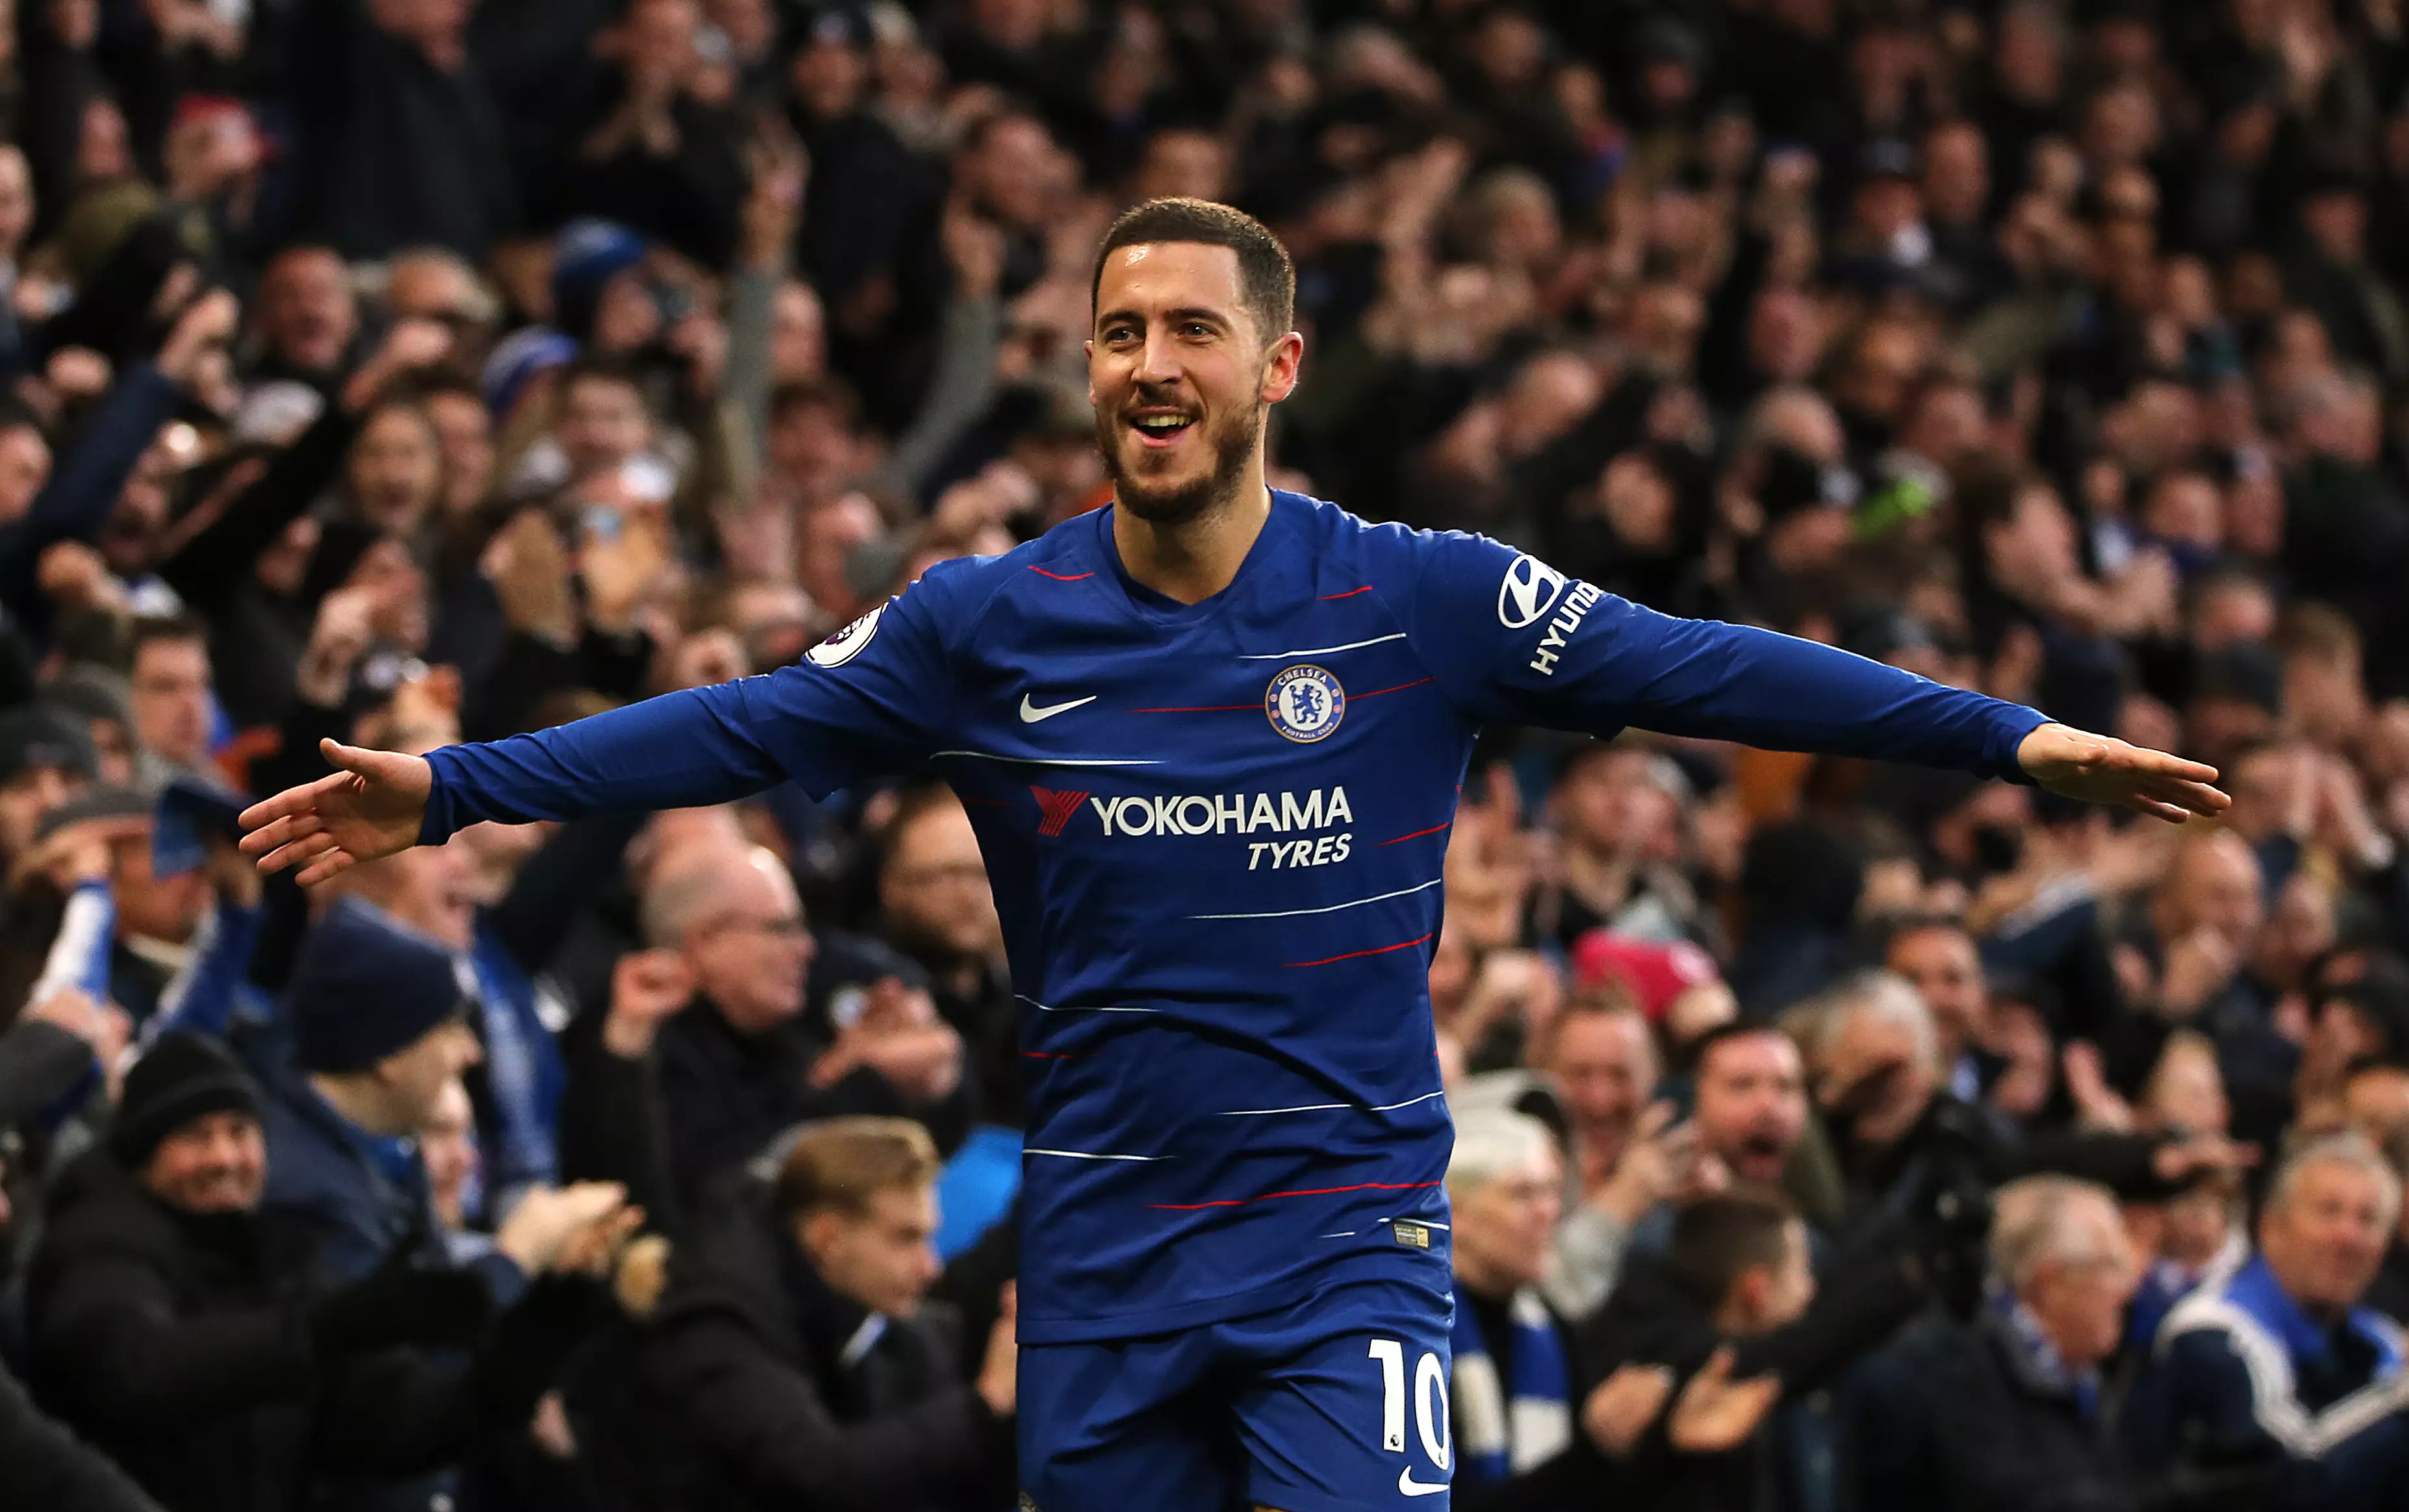 Hazard is extremely important to Chelsea. Image: PA Images